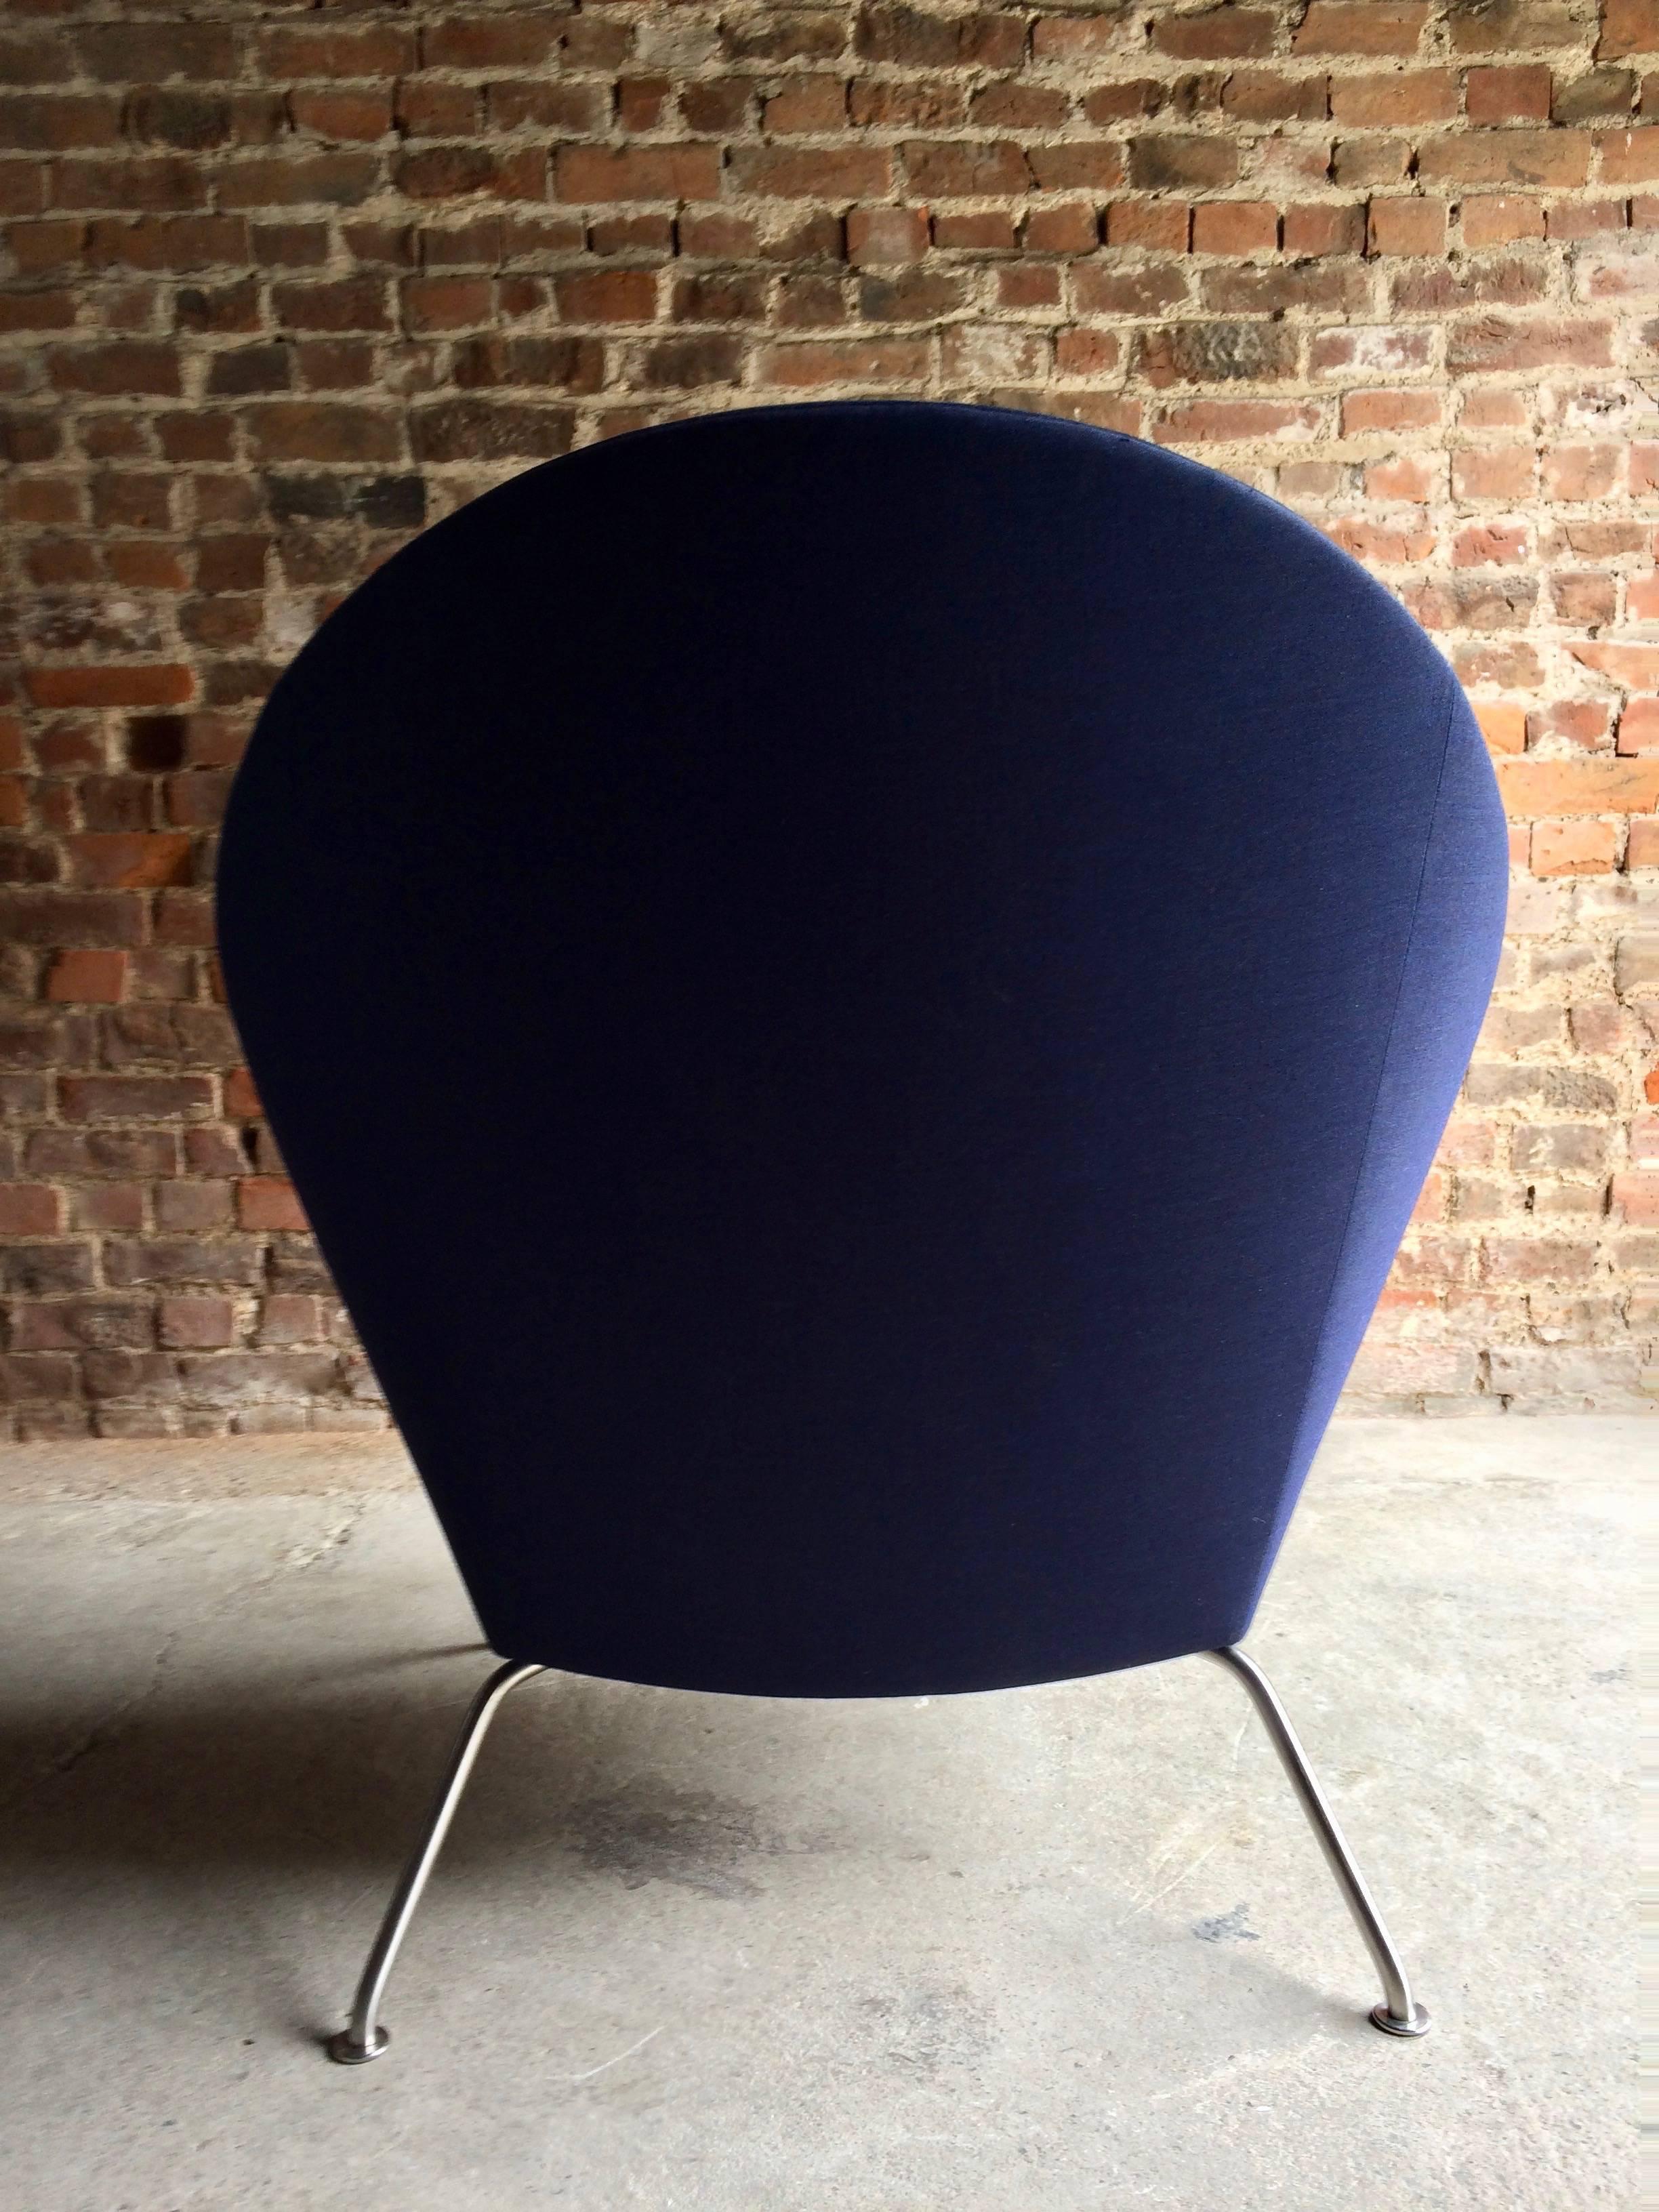 A model 468 oculus lounge chair, designed by Hans Wegner, manufactured by Carl Henson 2002, in blue fabric, on satin steel legs, bearing makers label to underside.

A sought-after and sculptural armchair designed by Hans J. Wegner in the 1960s,